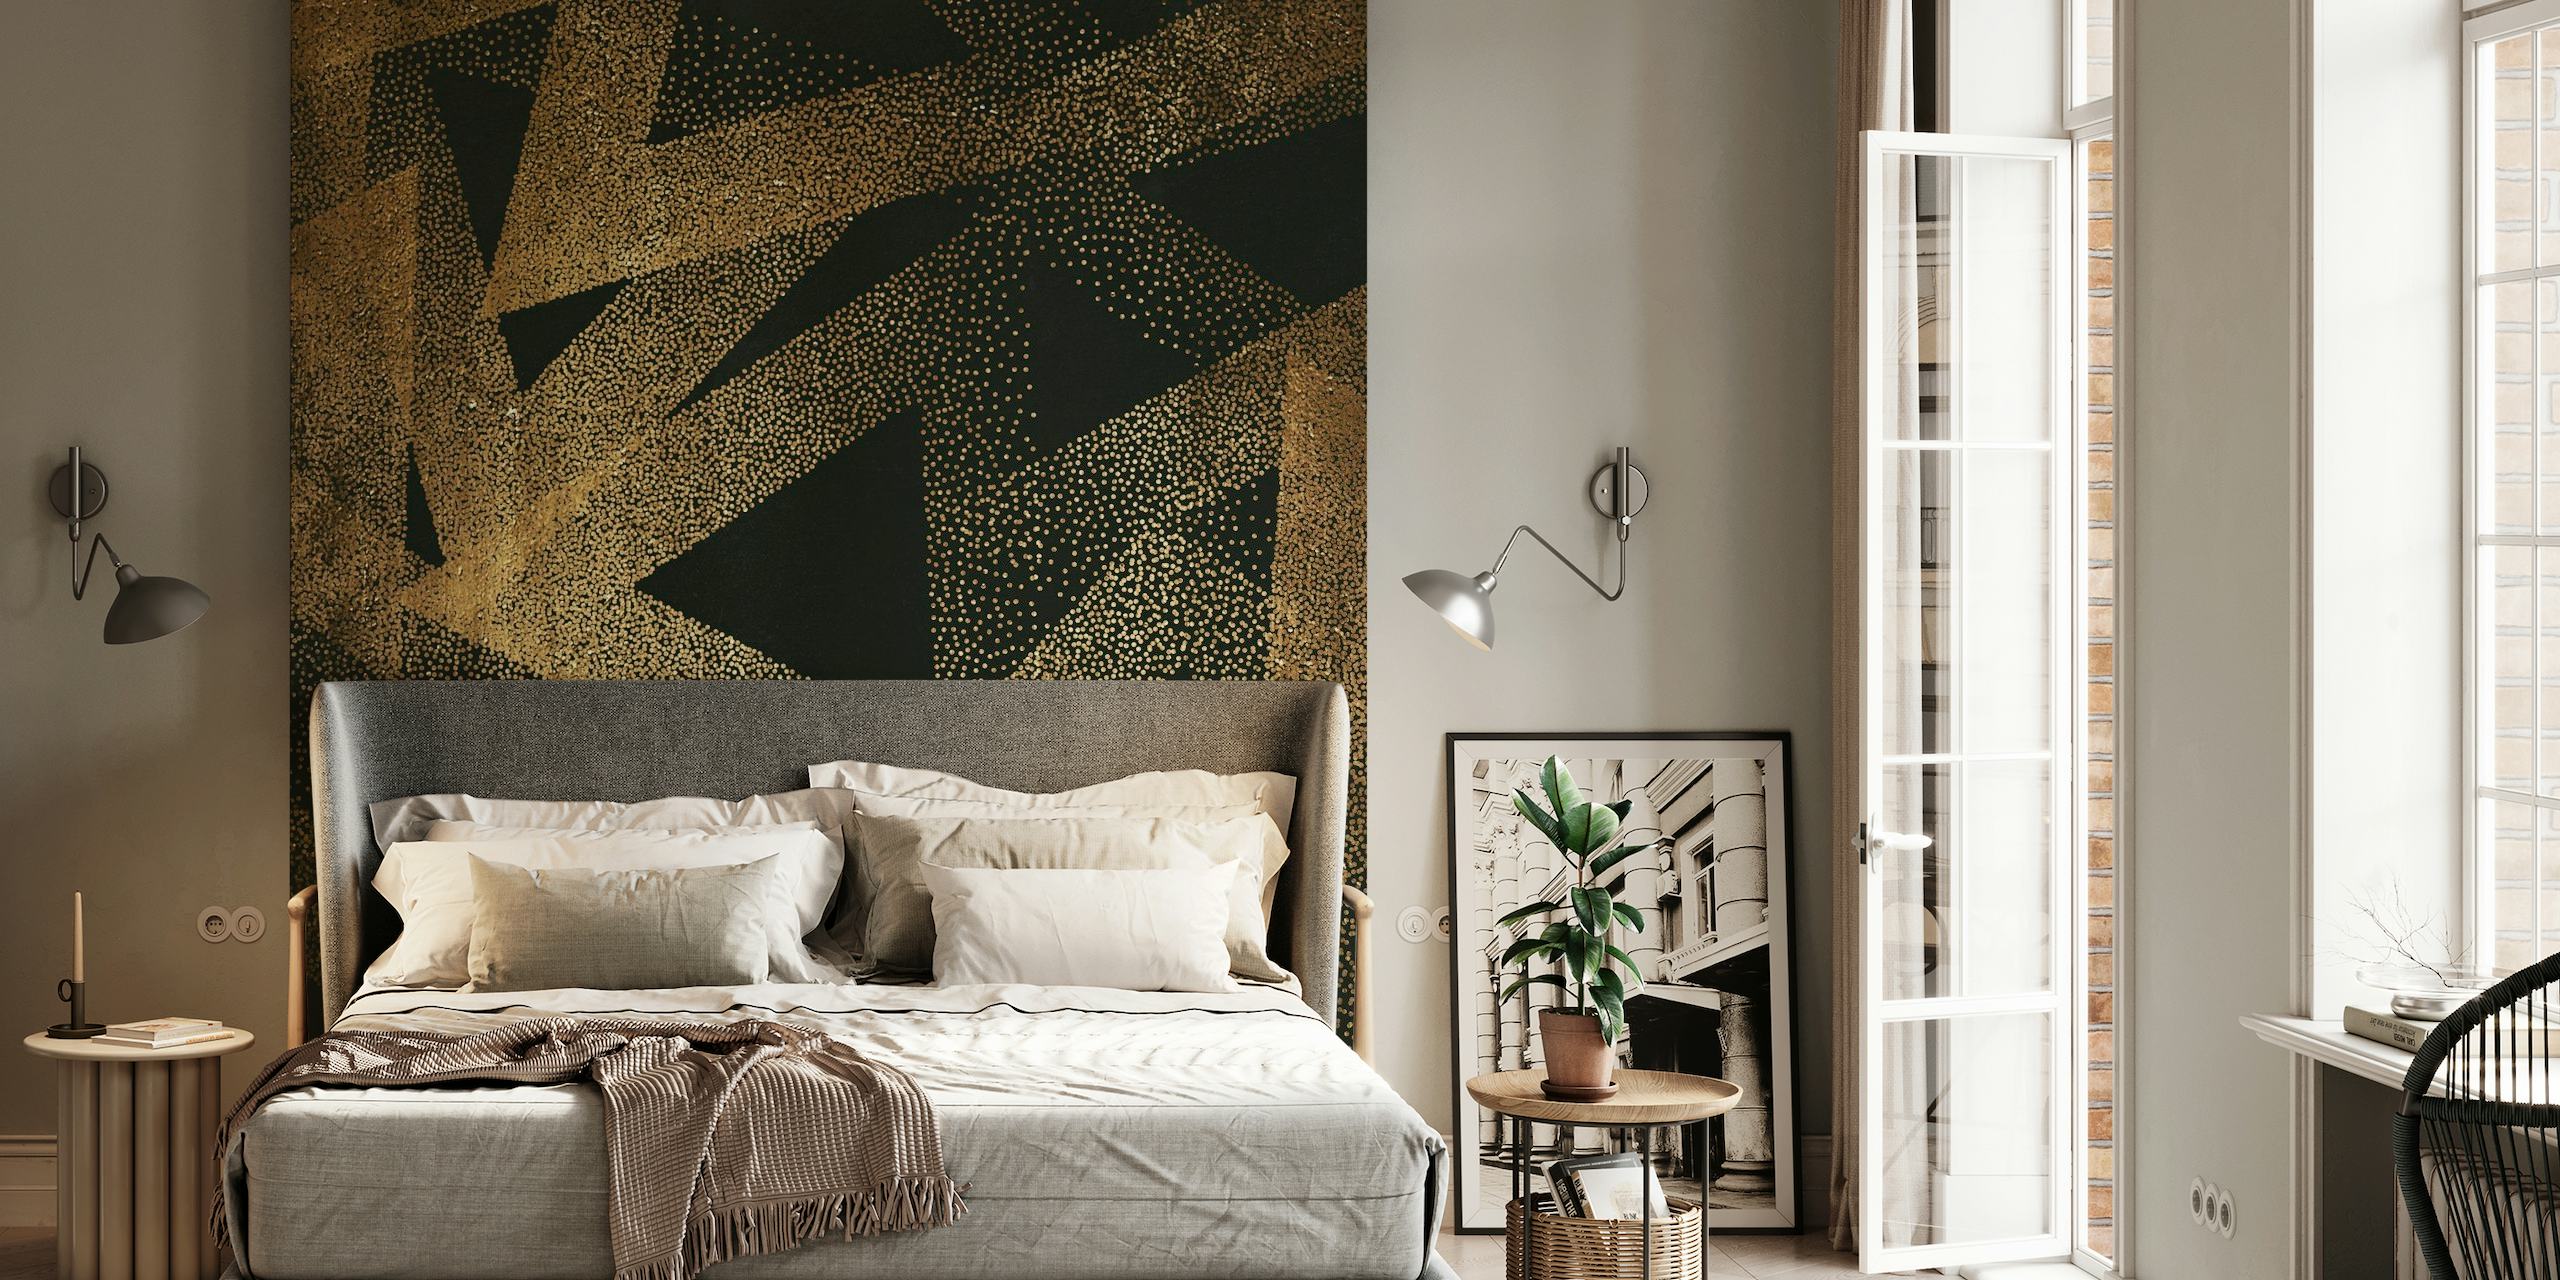 Gold triangle pattern Picasso-inspired wallpaper